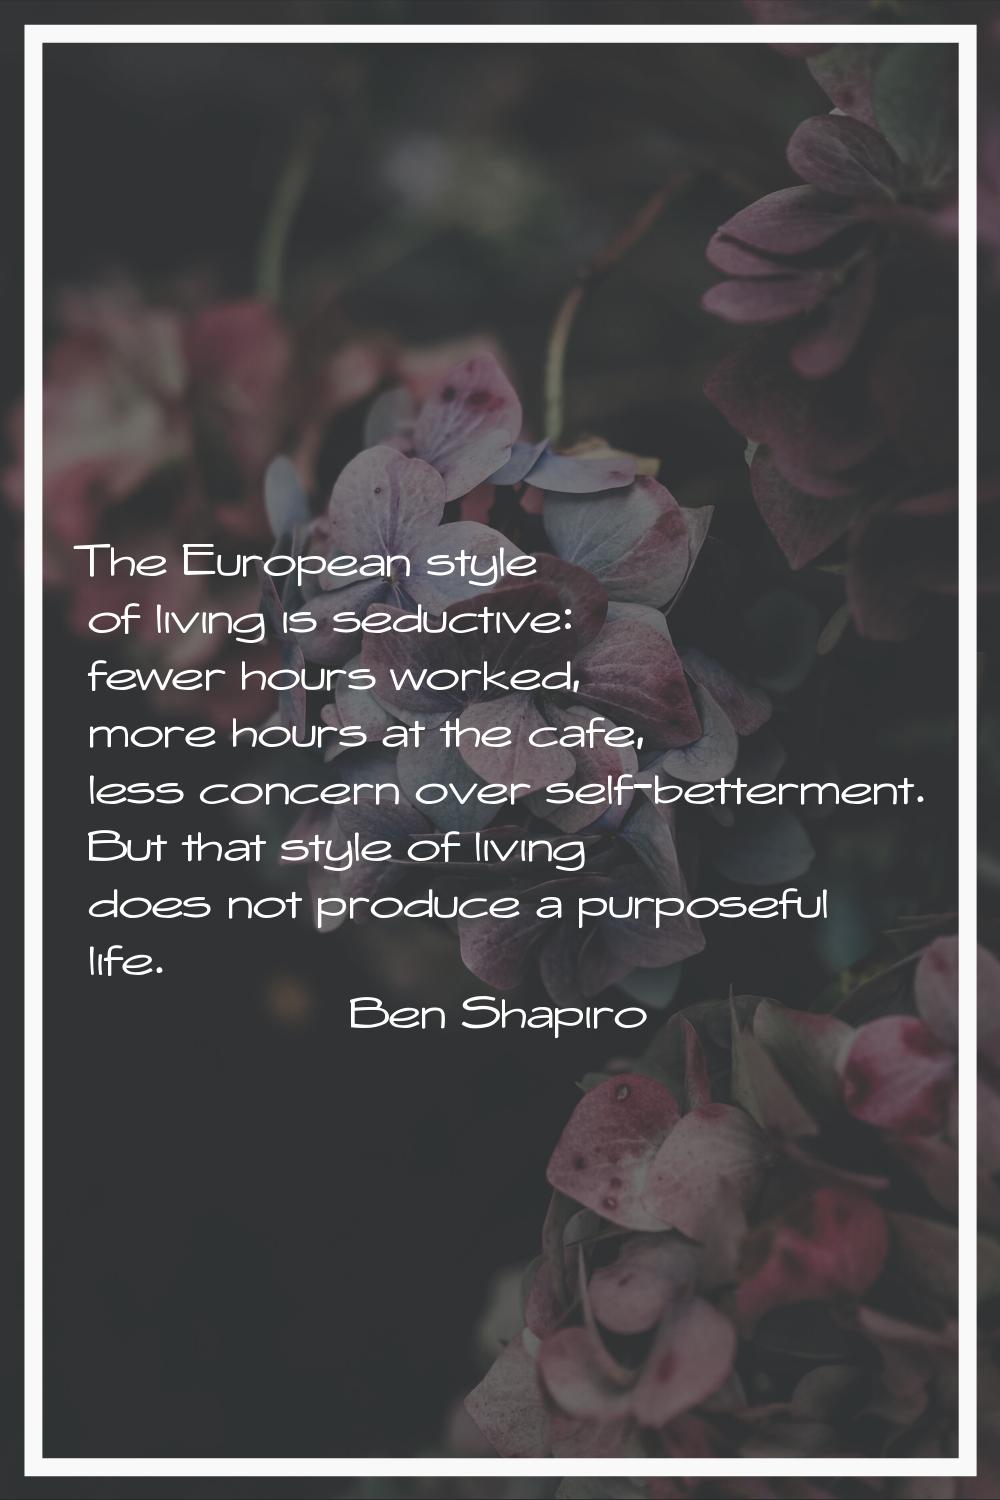 The European style of living is seductive: fewer hours worked, more hours at the cafe, less concern